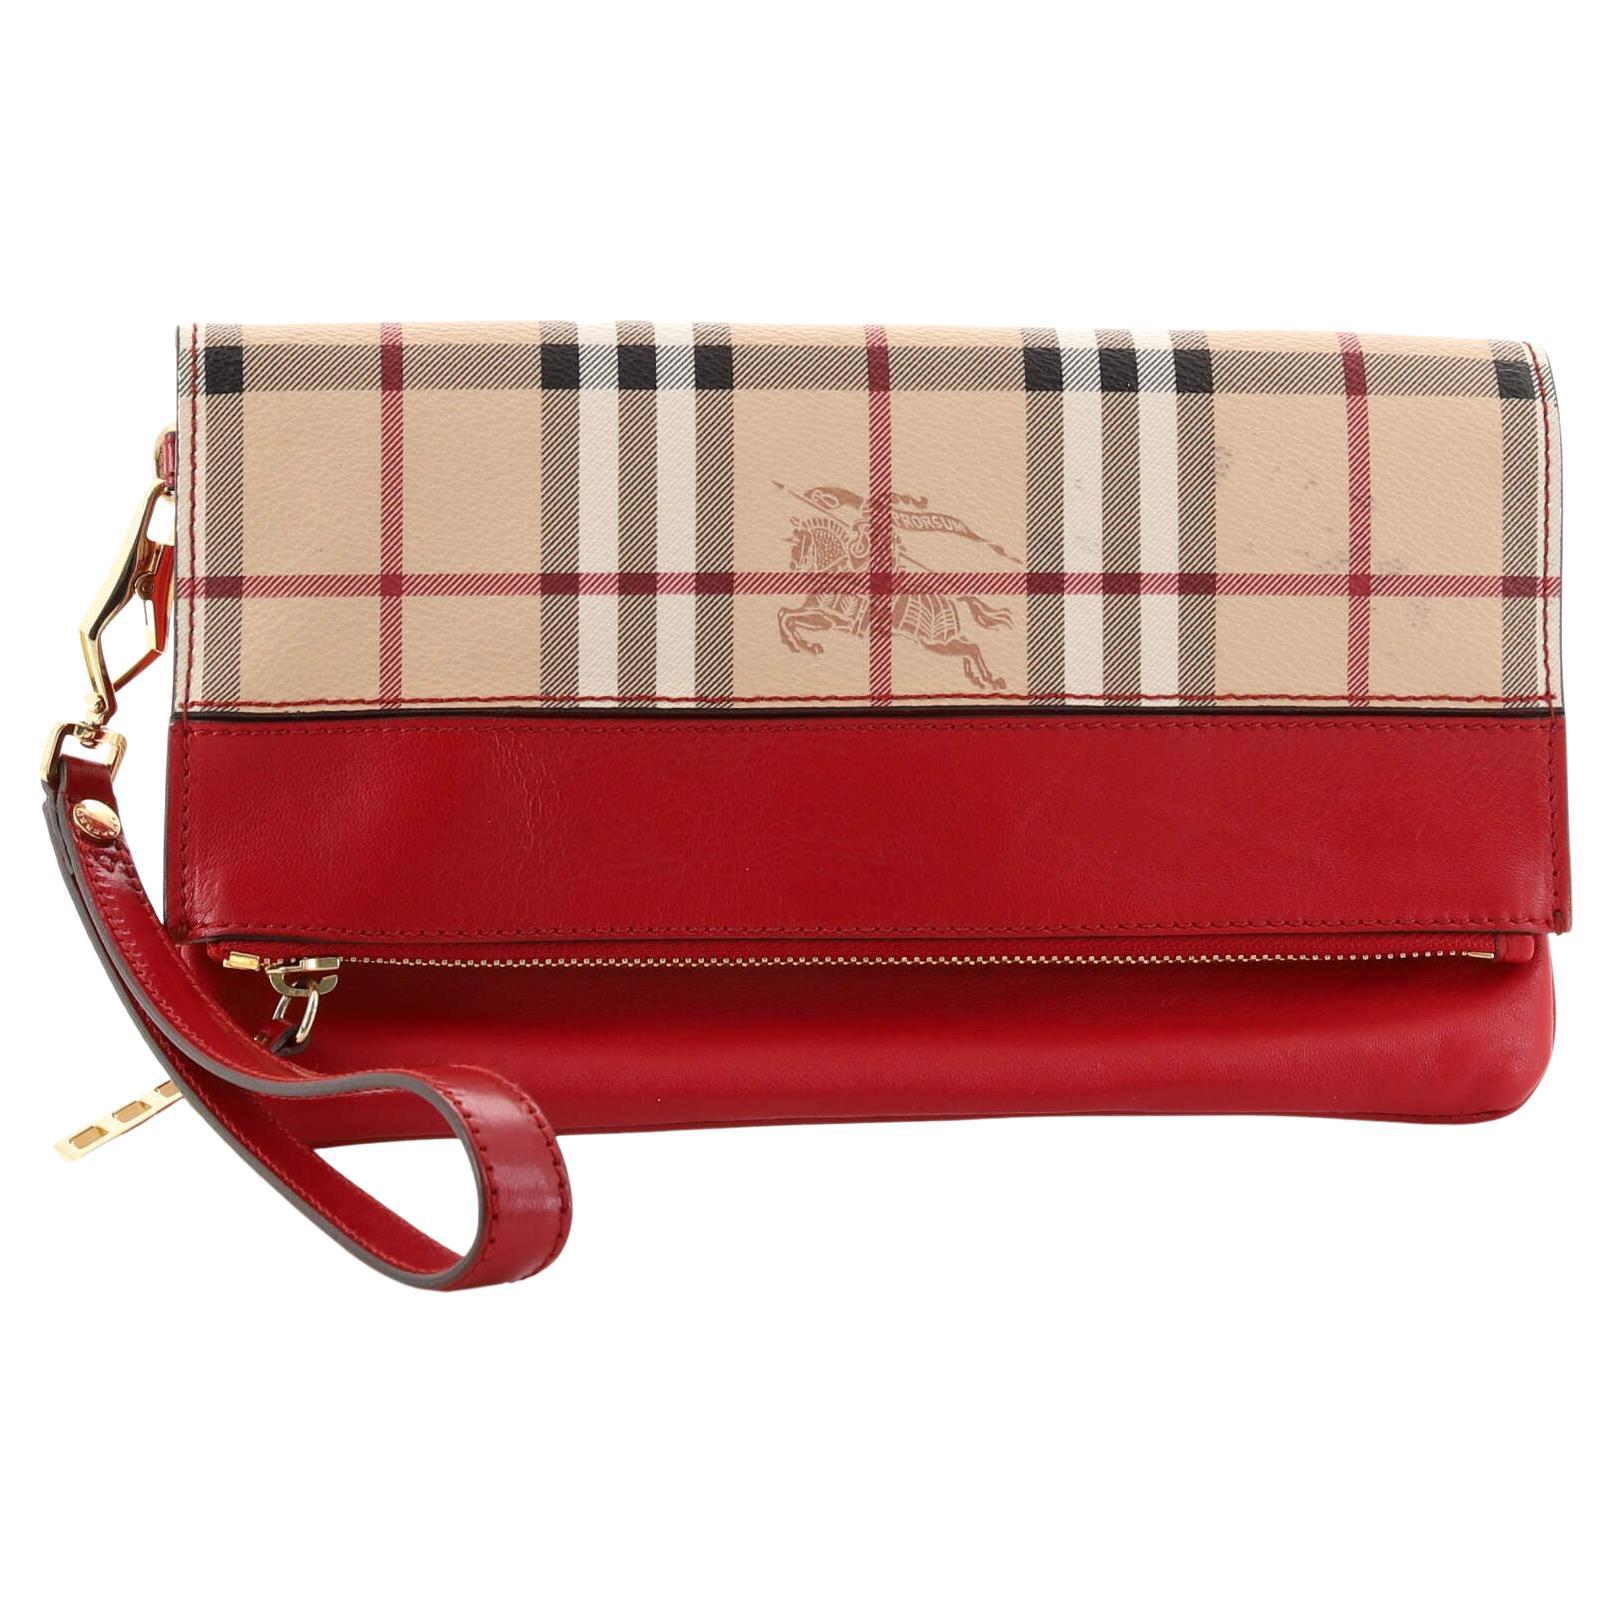 Burberry Adeline Fold Over Wristlet Clutch Haymarket Coated Canvas and L